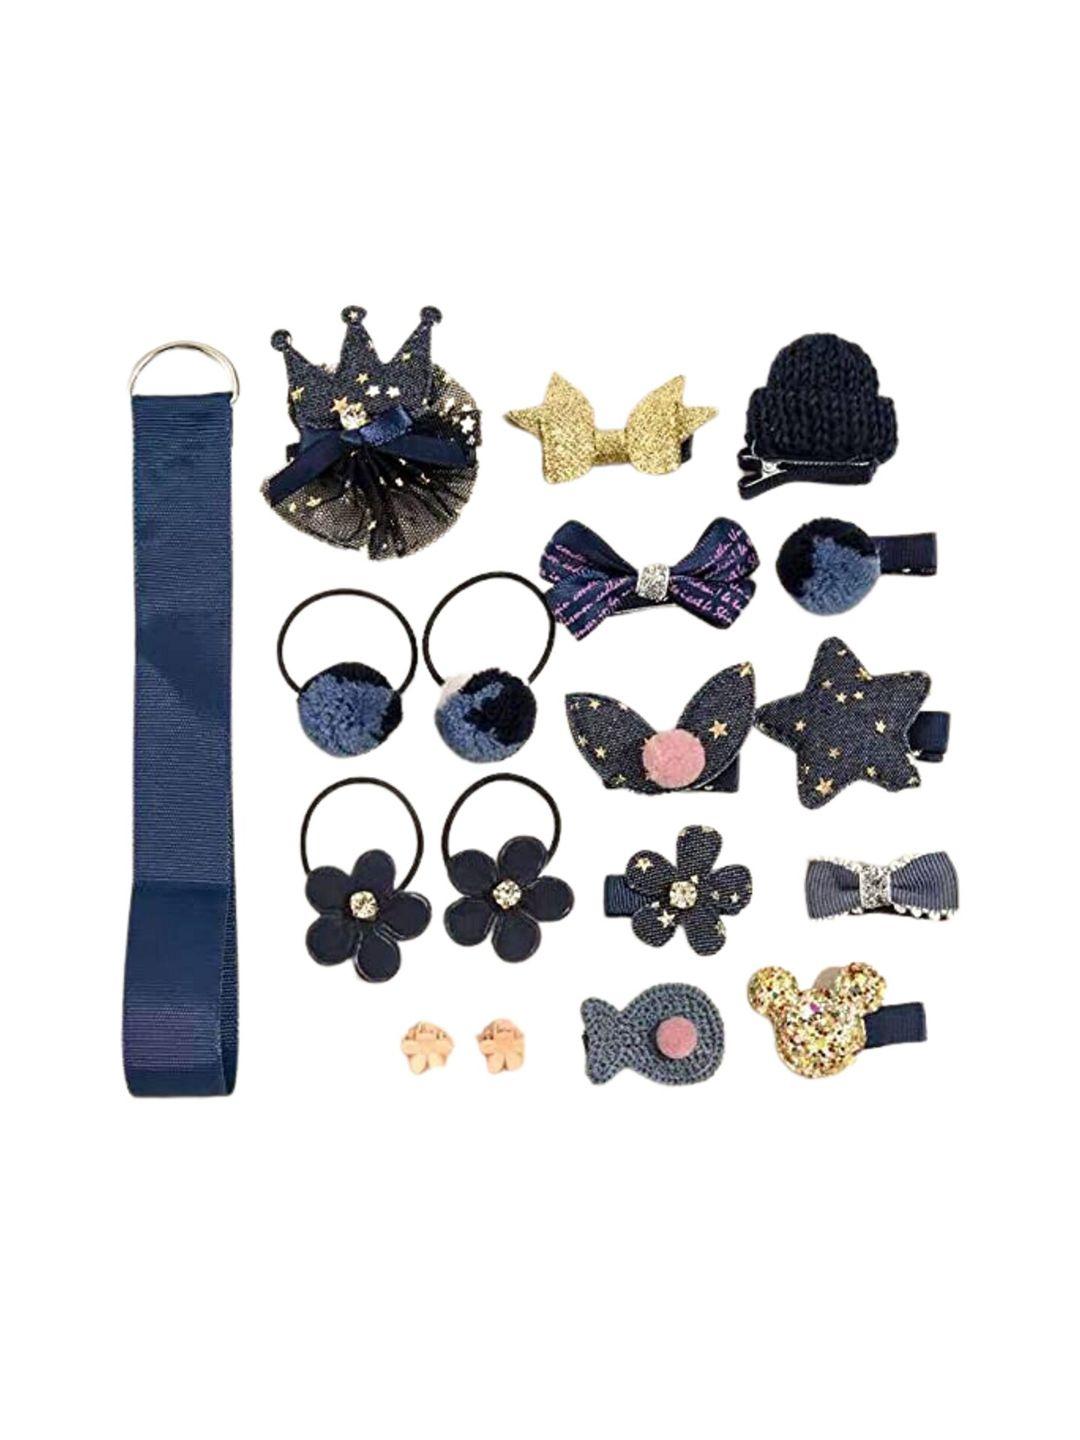 youstylo set of 18 hair accessory set